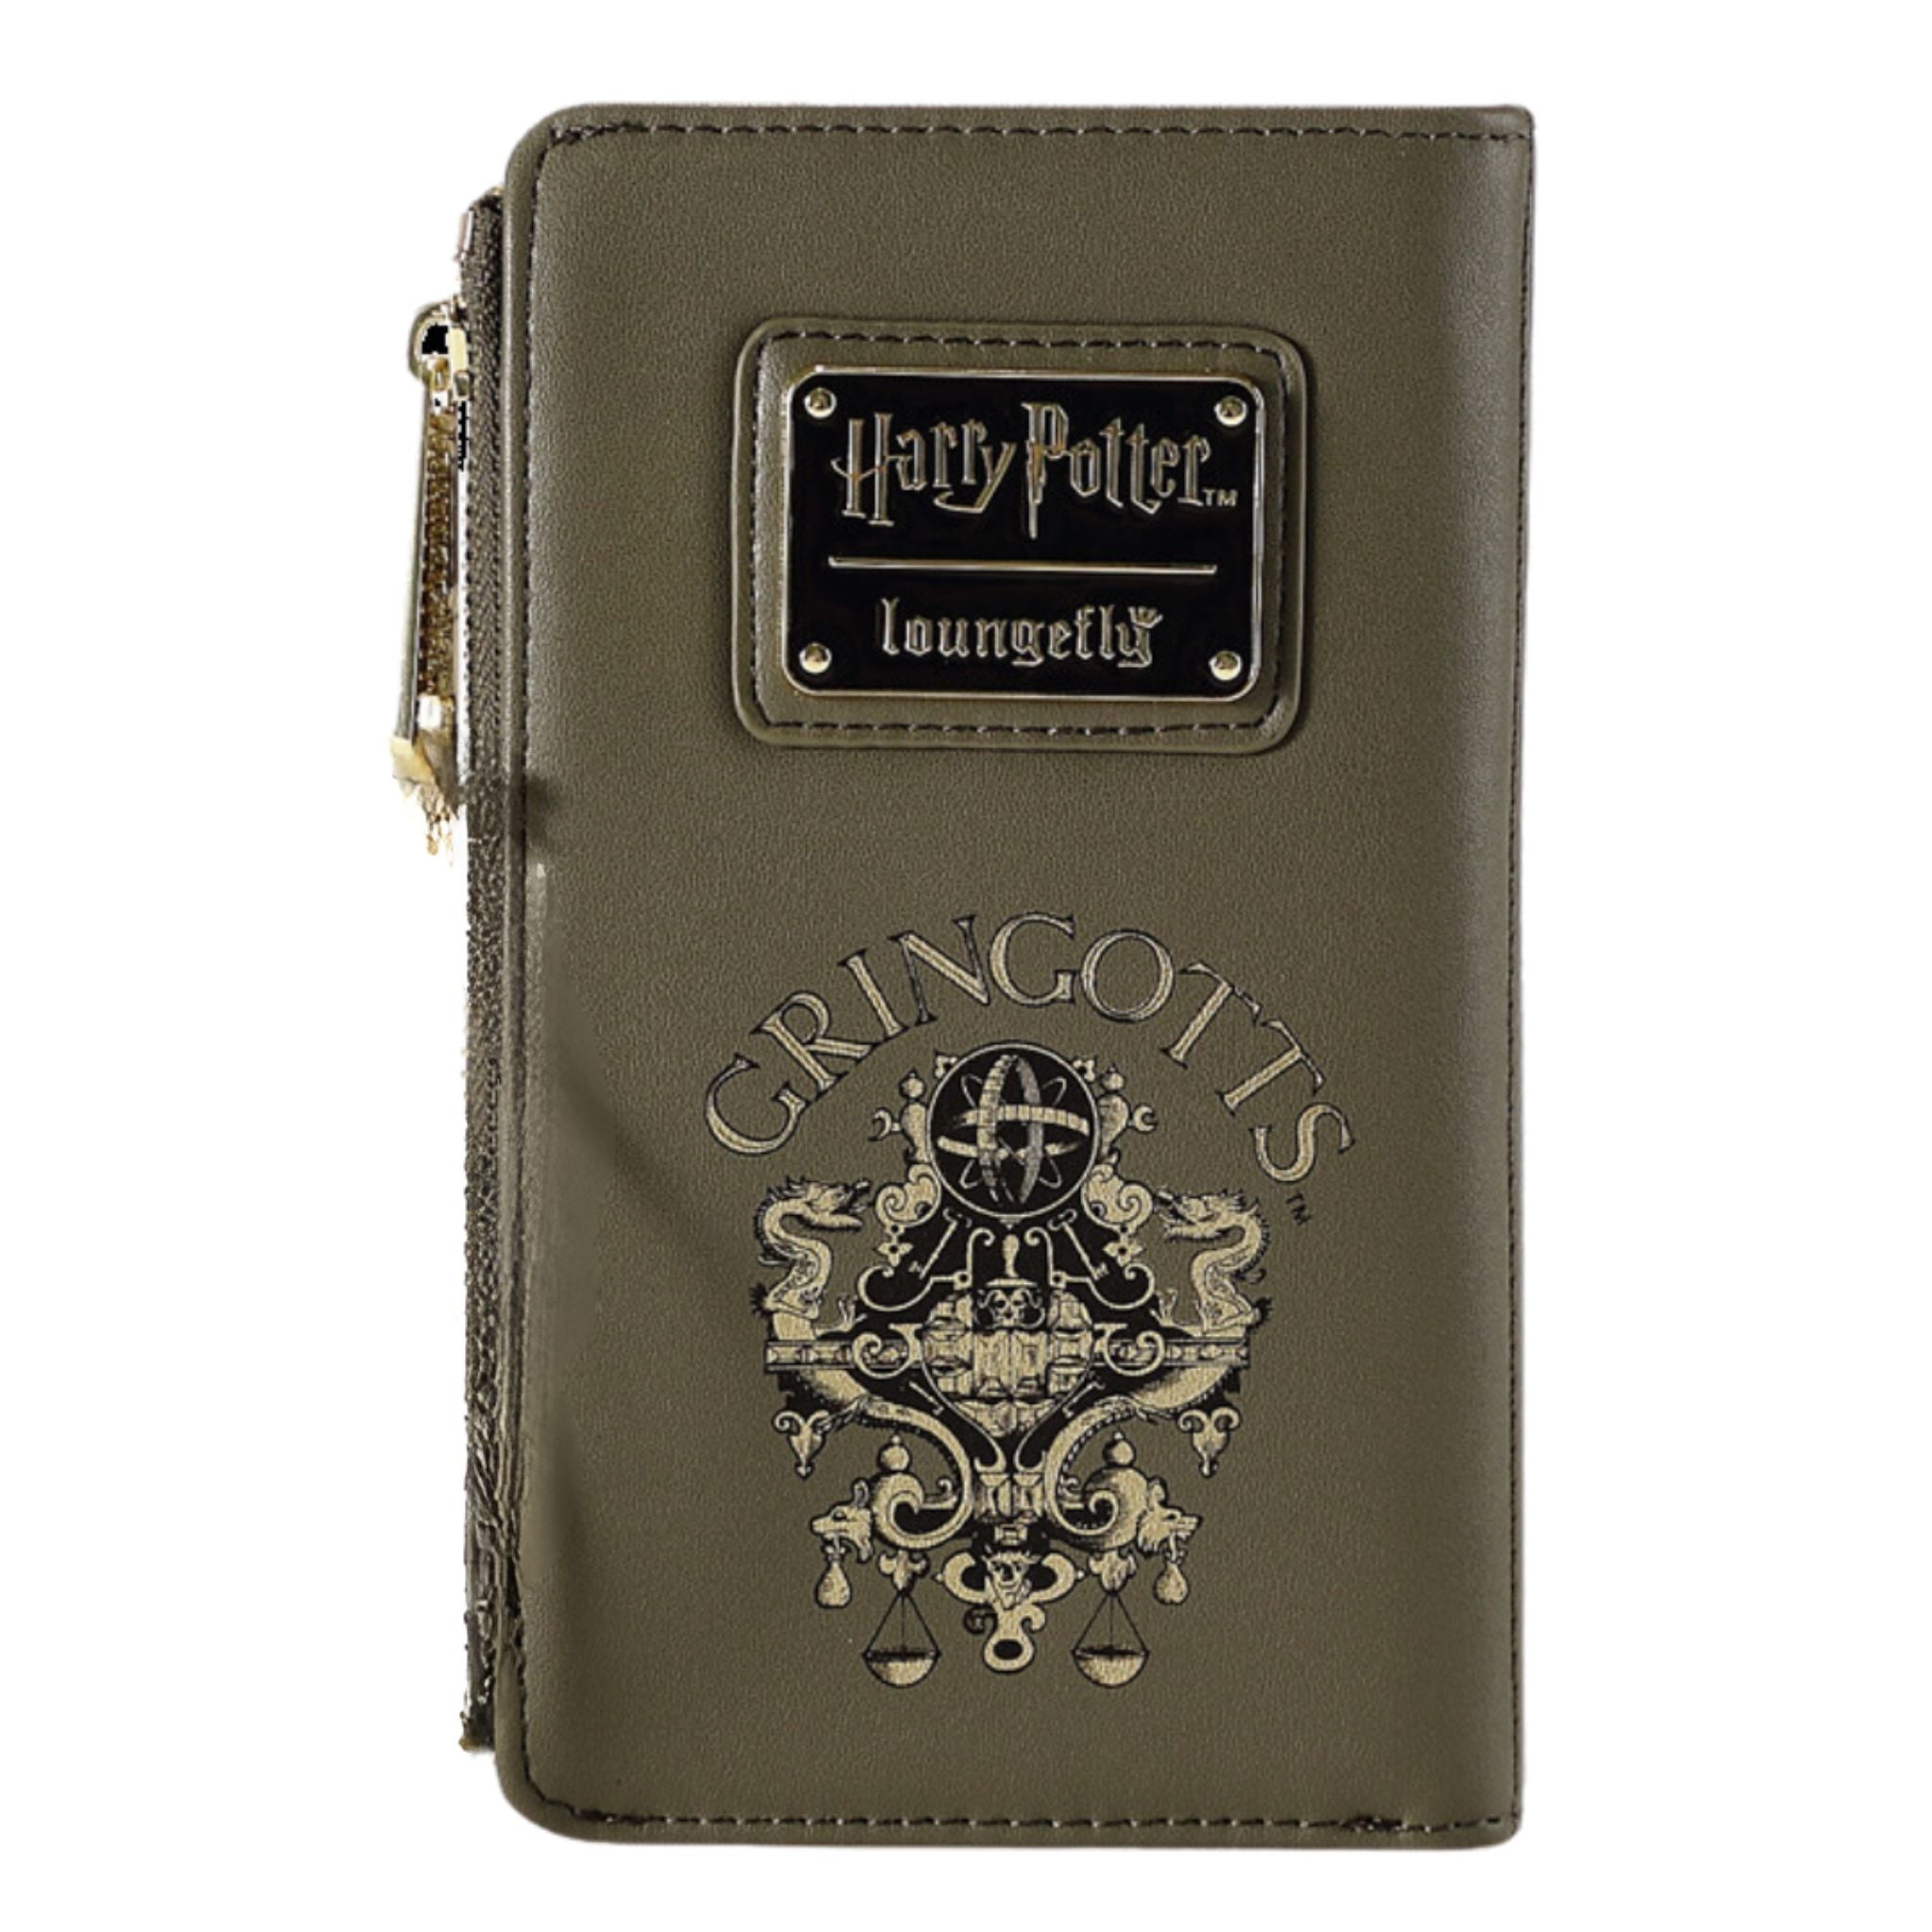 Loungefly Harry Potter Gringotts Bank and Dragon Wallet